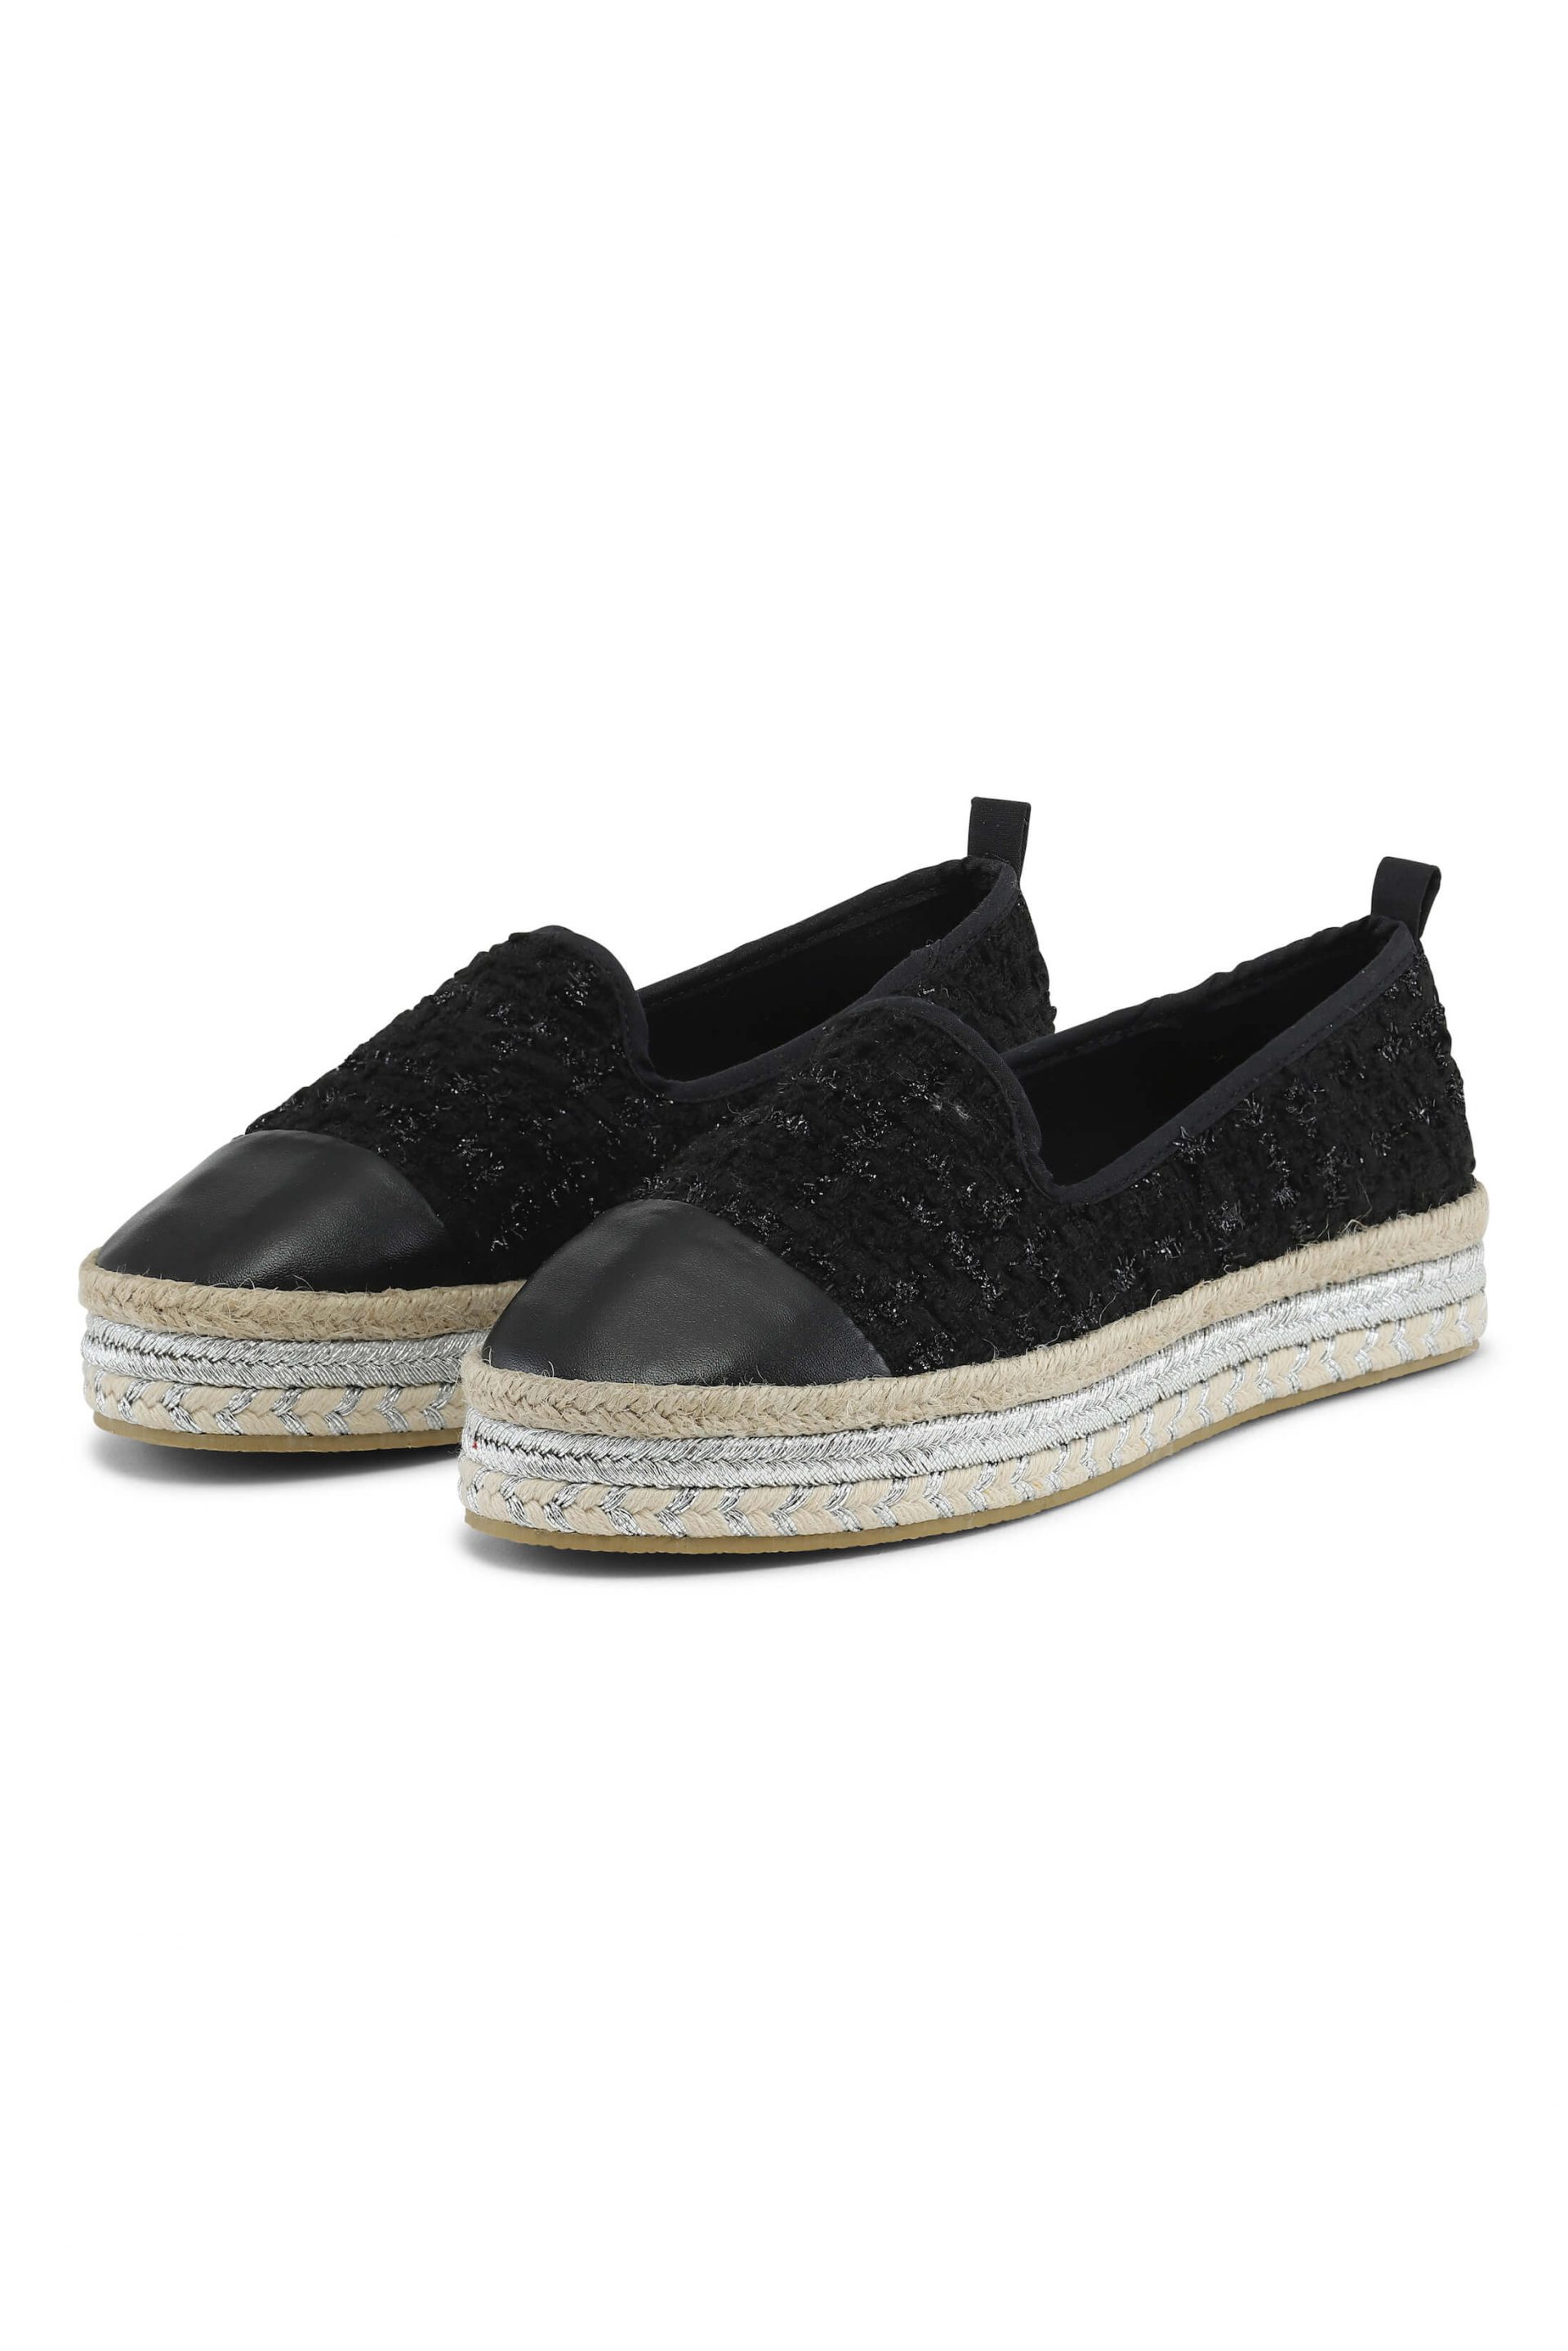 Black quiltet espadrillos with silver details